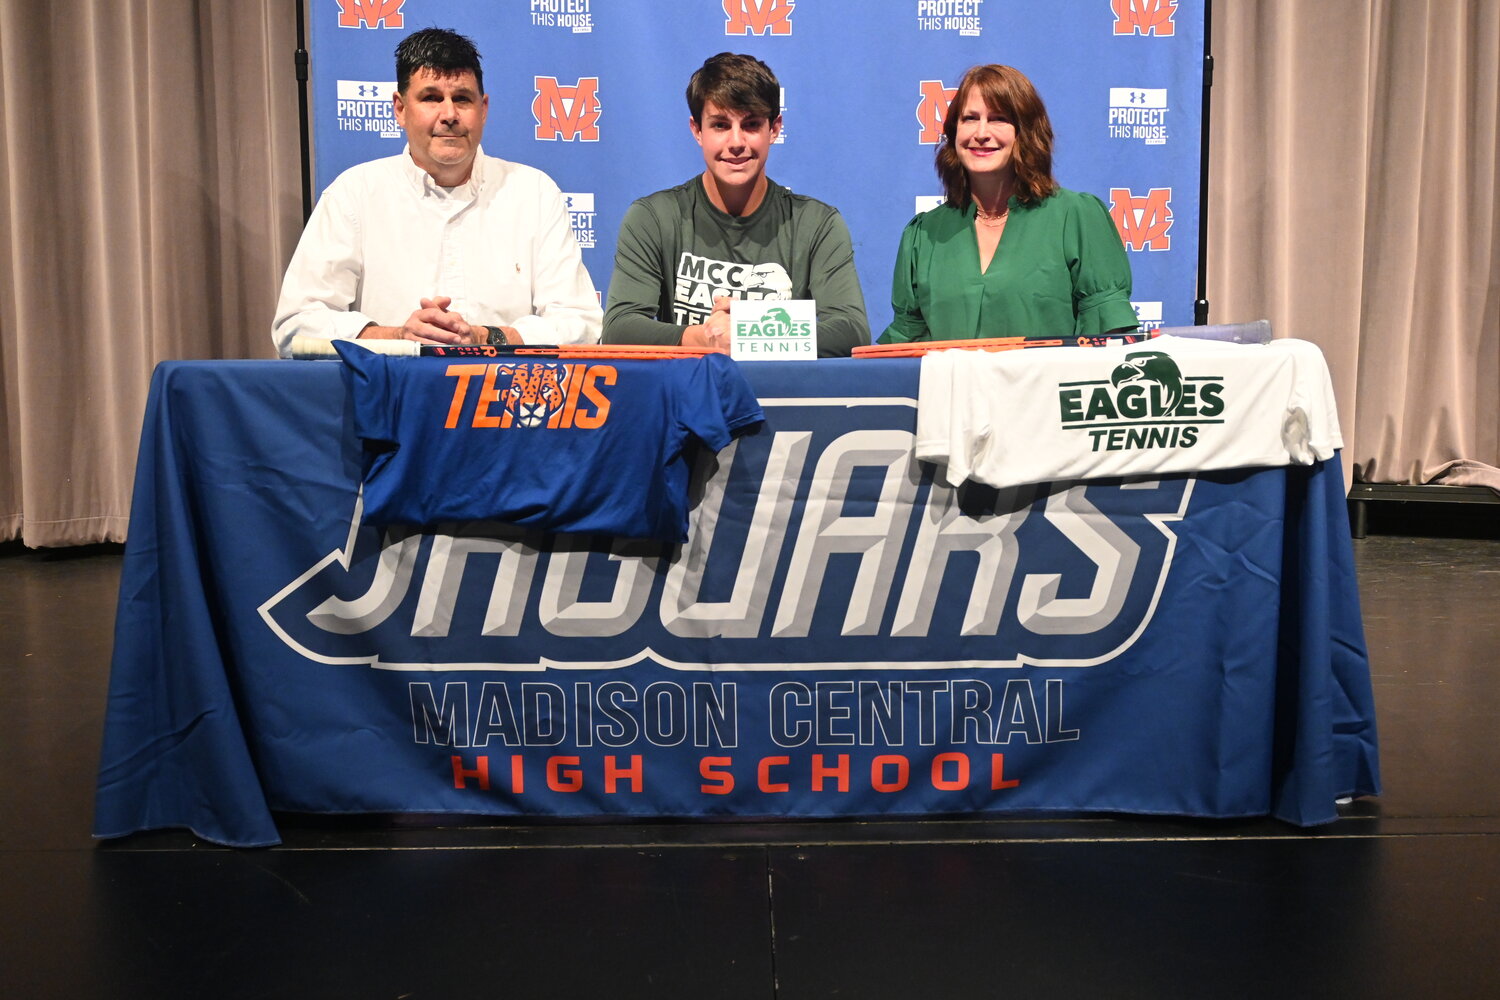 Madison Central High School senior Mark Little signed a national letter of intent to play tennis at Meridian Community College. Seated left to right are Joe Little (dad), Little, and Becky Little (mom).